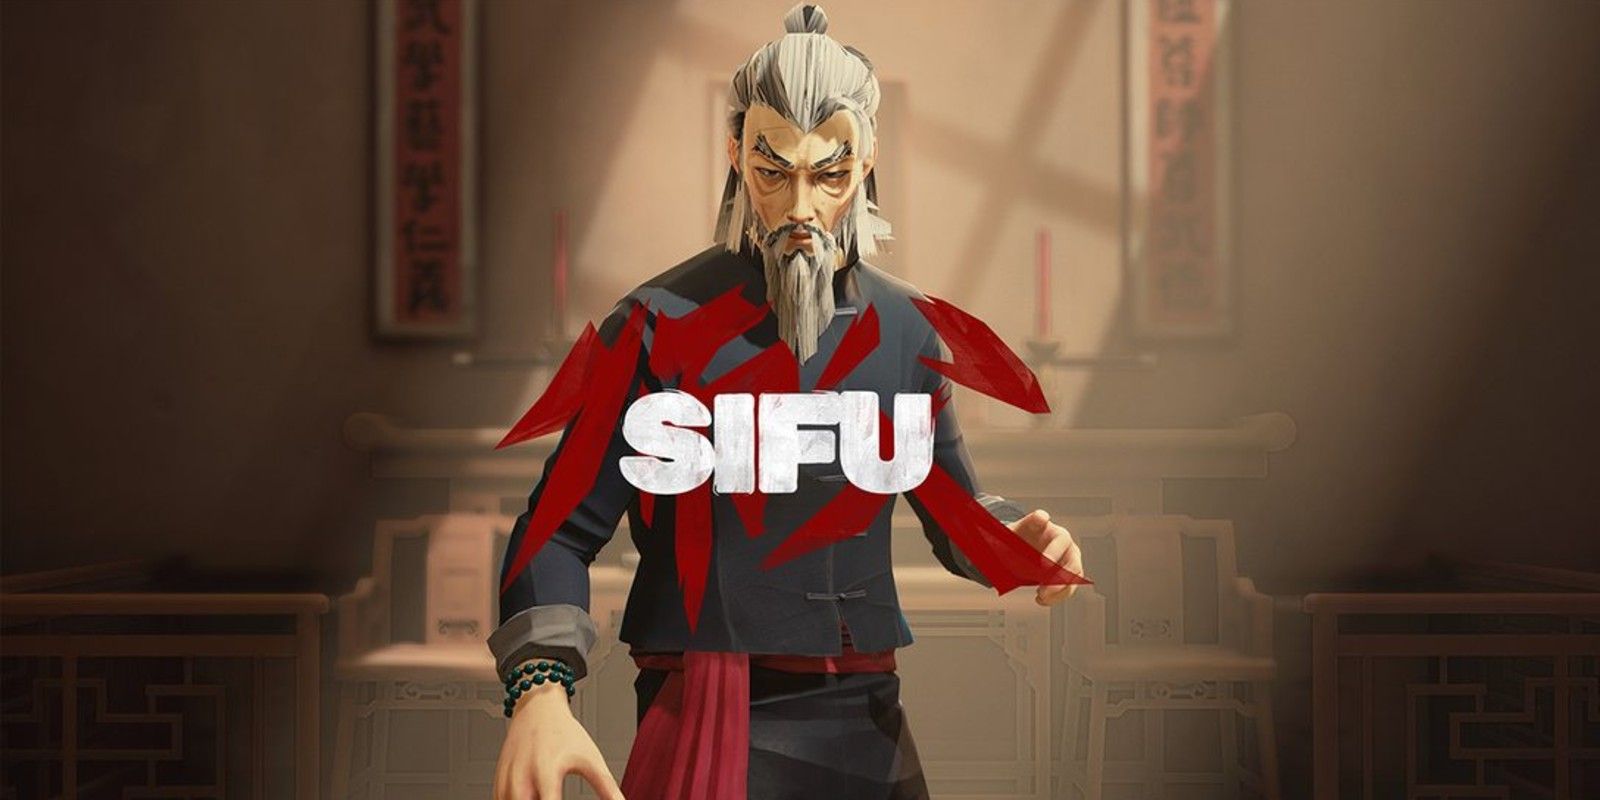 Sifu's main character behind the game's logo, standing in a dojo in a martial arts stance.